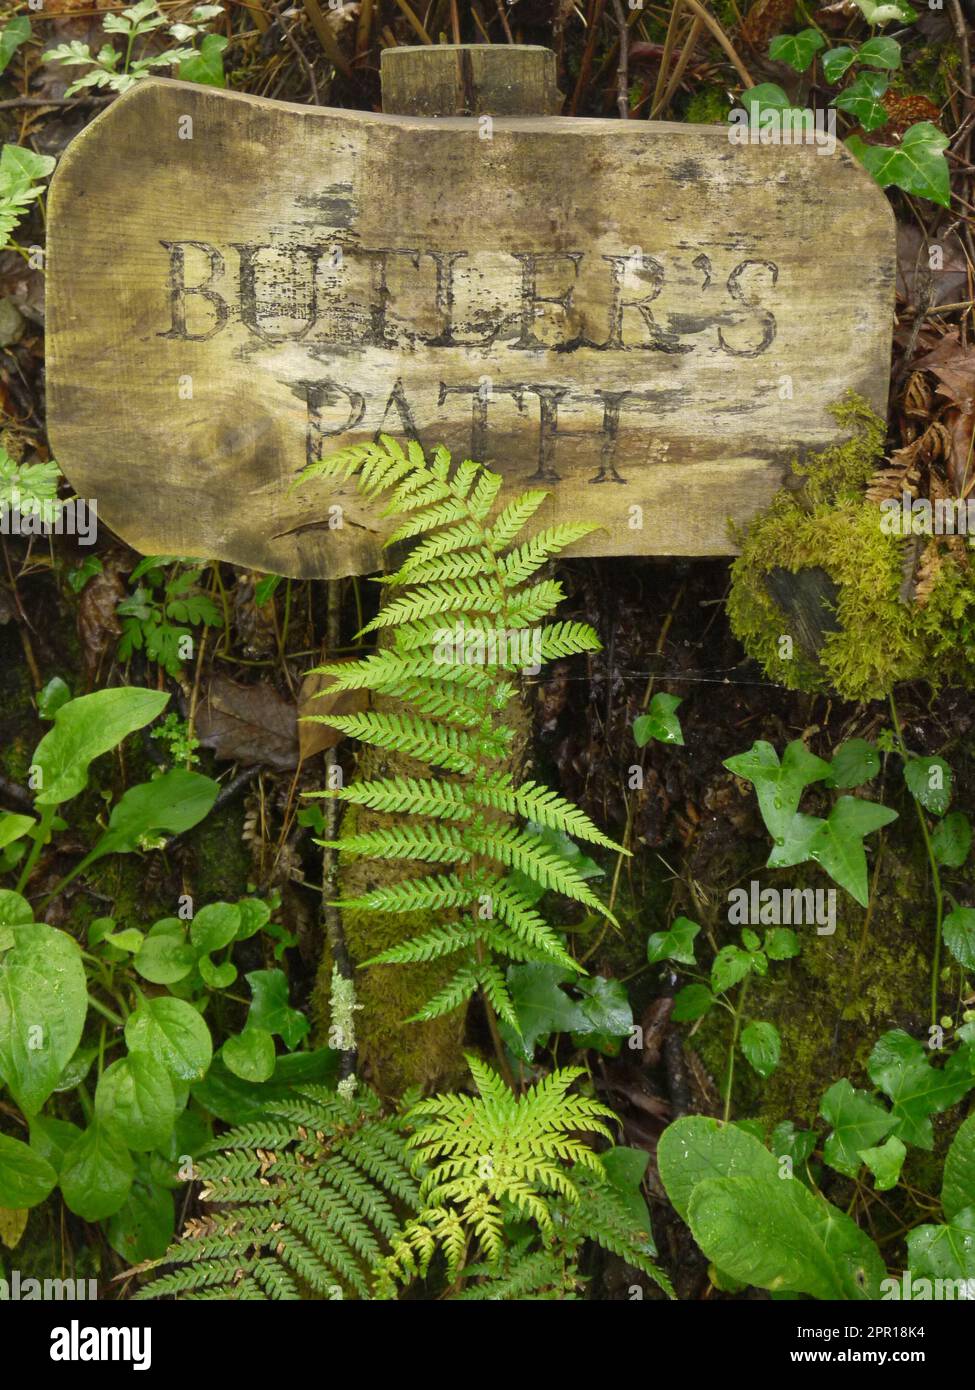 A fern grows in front of the weathered sign for Butler's Path, which runs alongside The Jungle at the Lost Gardens of Heligan - June 2019 Stock Photo